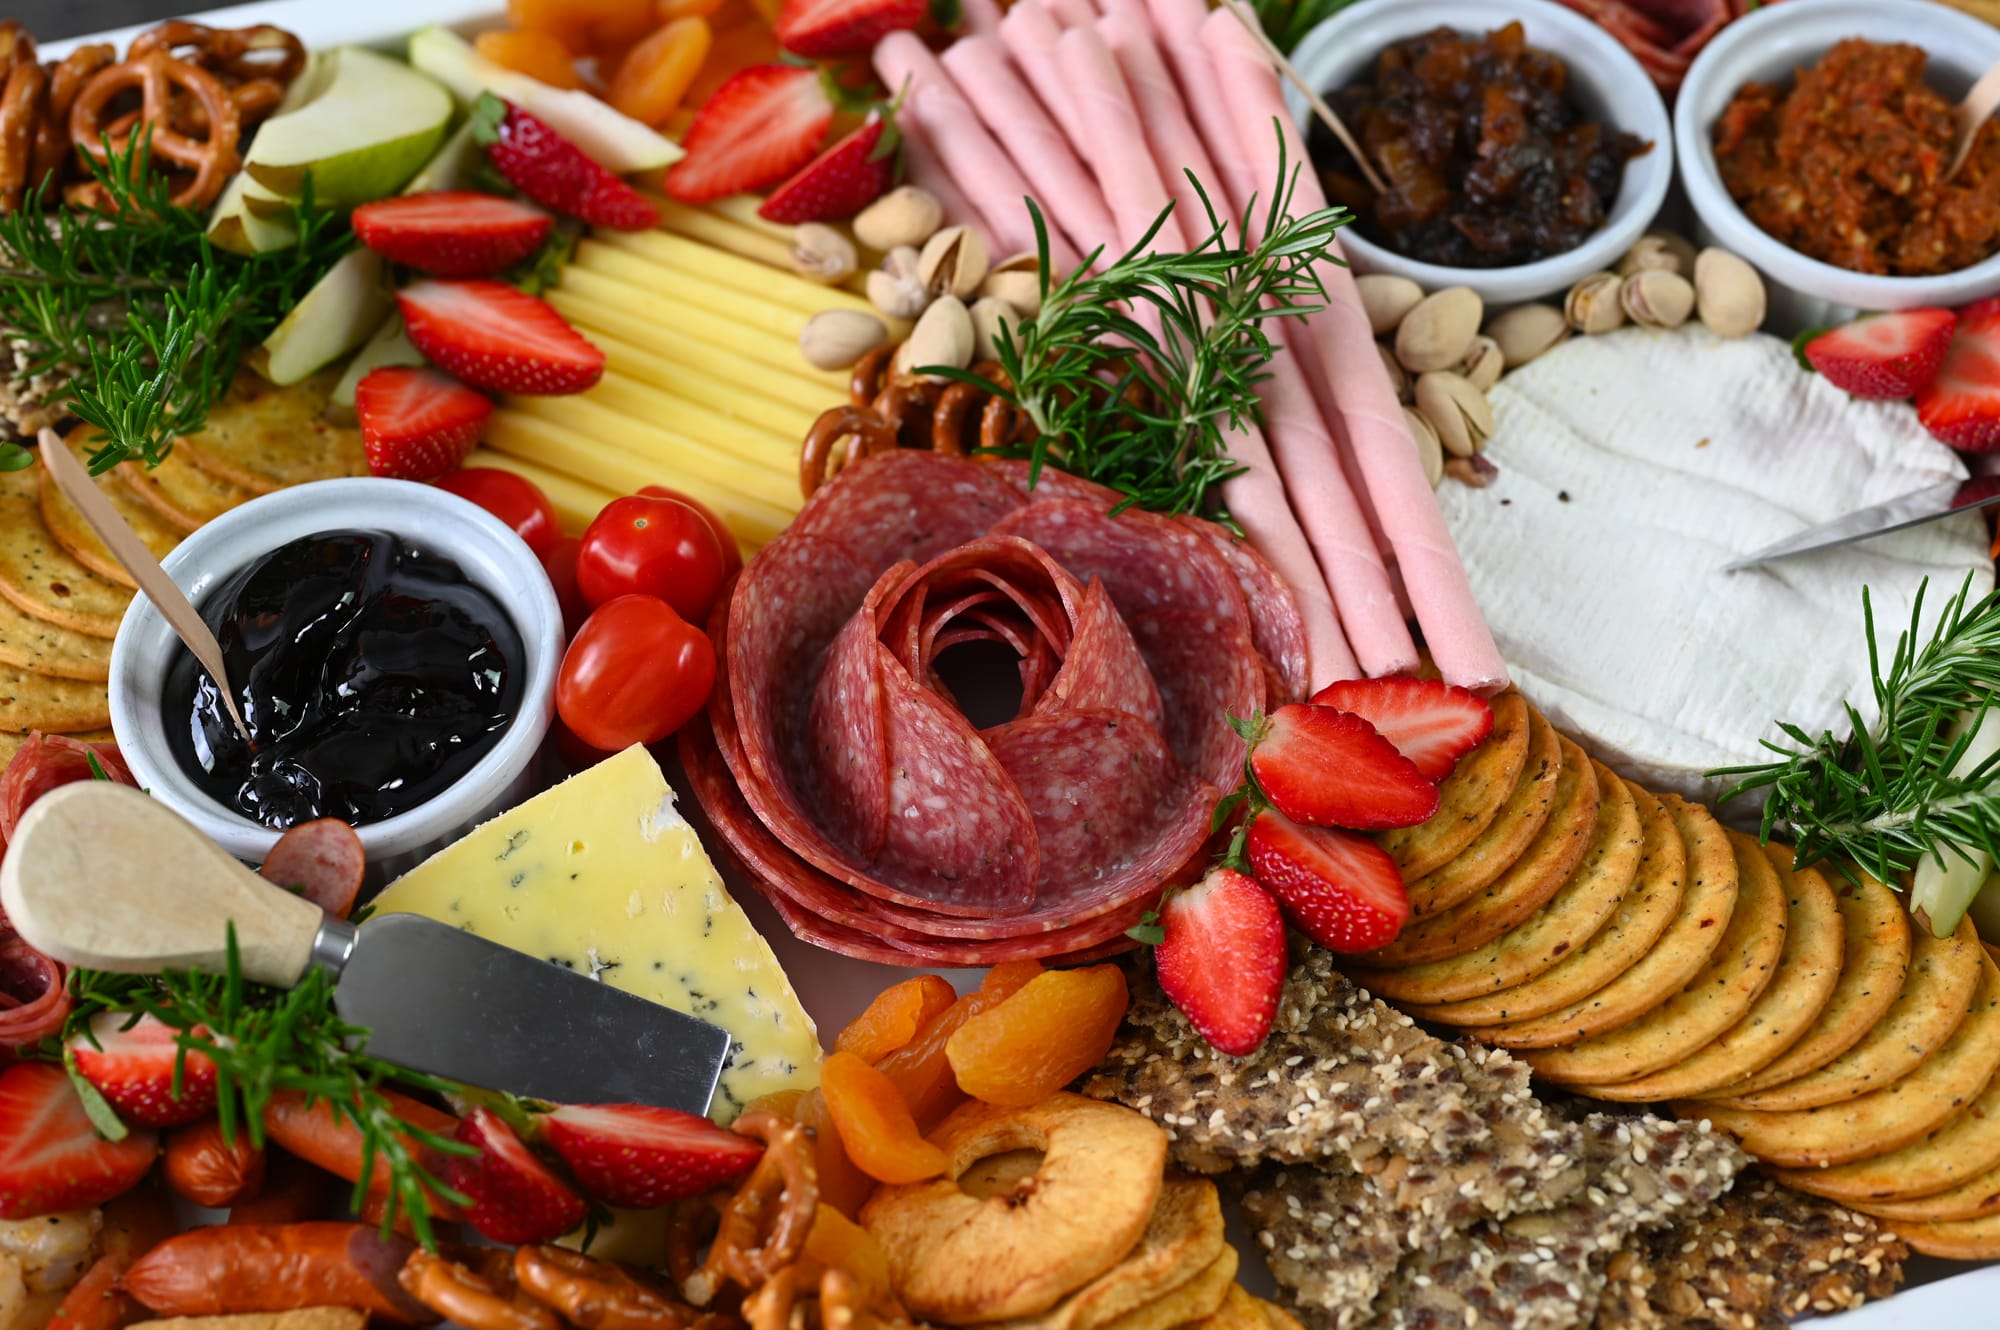 What Is A Charcuterie Board? - Issue #59